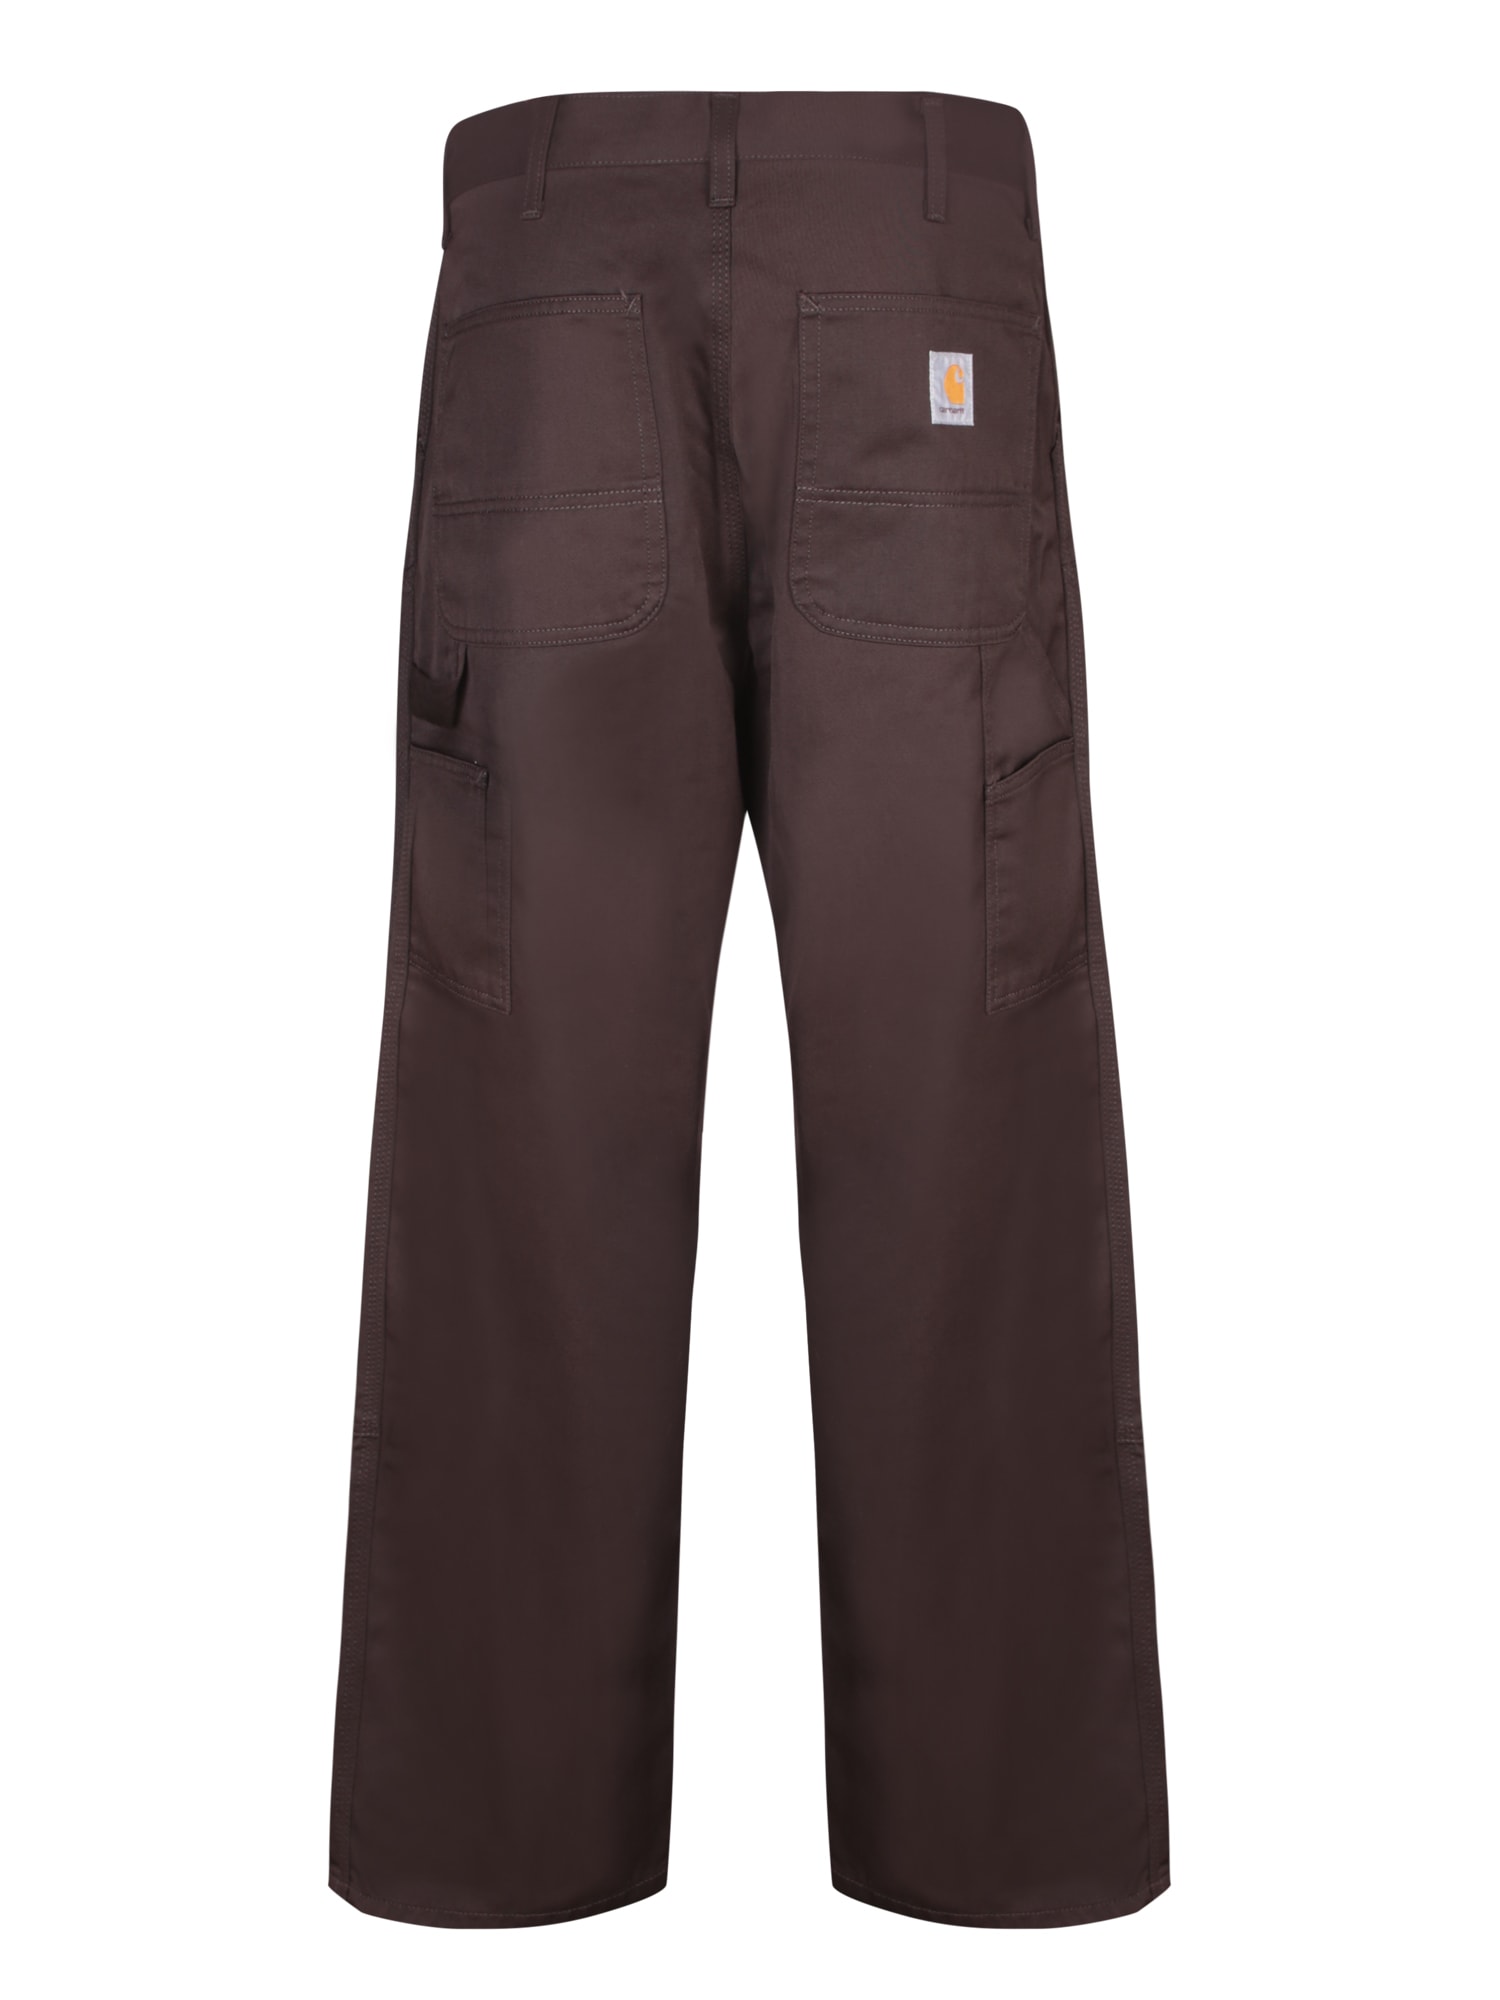 Shop Carhartt Double Knee Brown Trousers